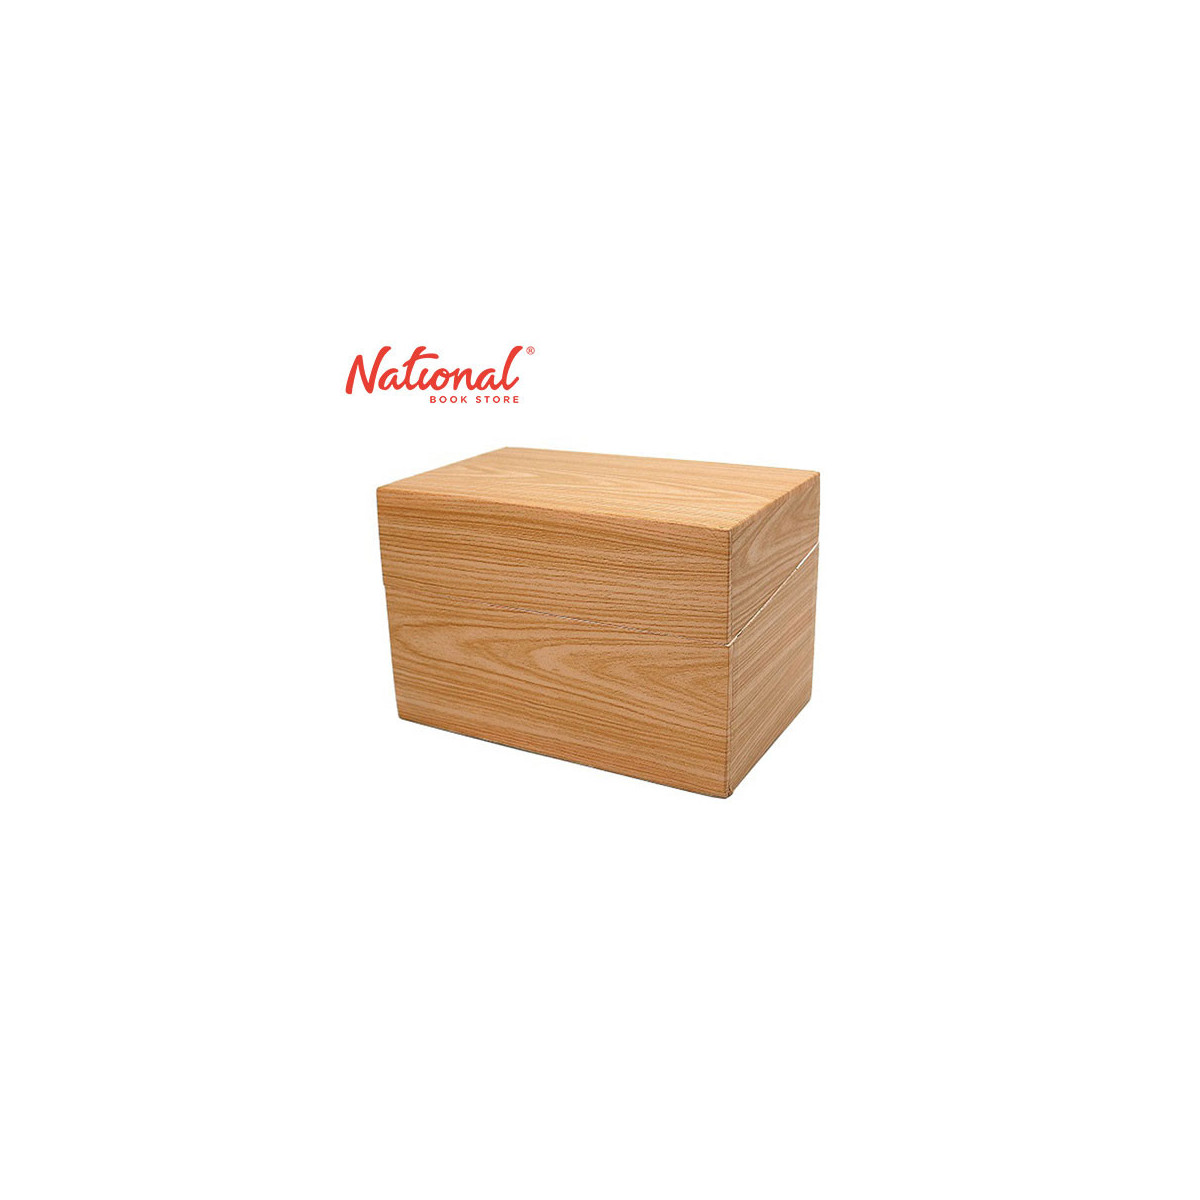 Local Index Box 5x8 inches Laminated Wood - Office Supplies - Filing Supplies